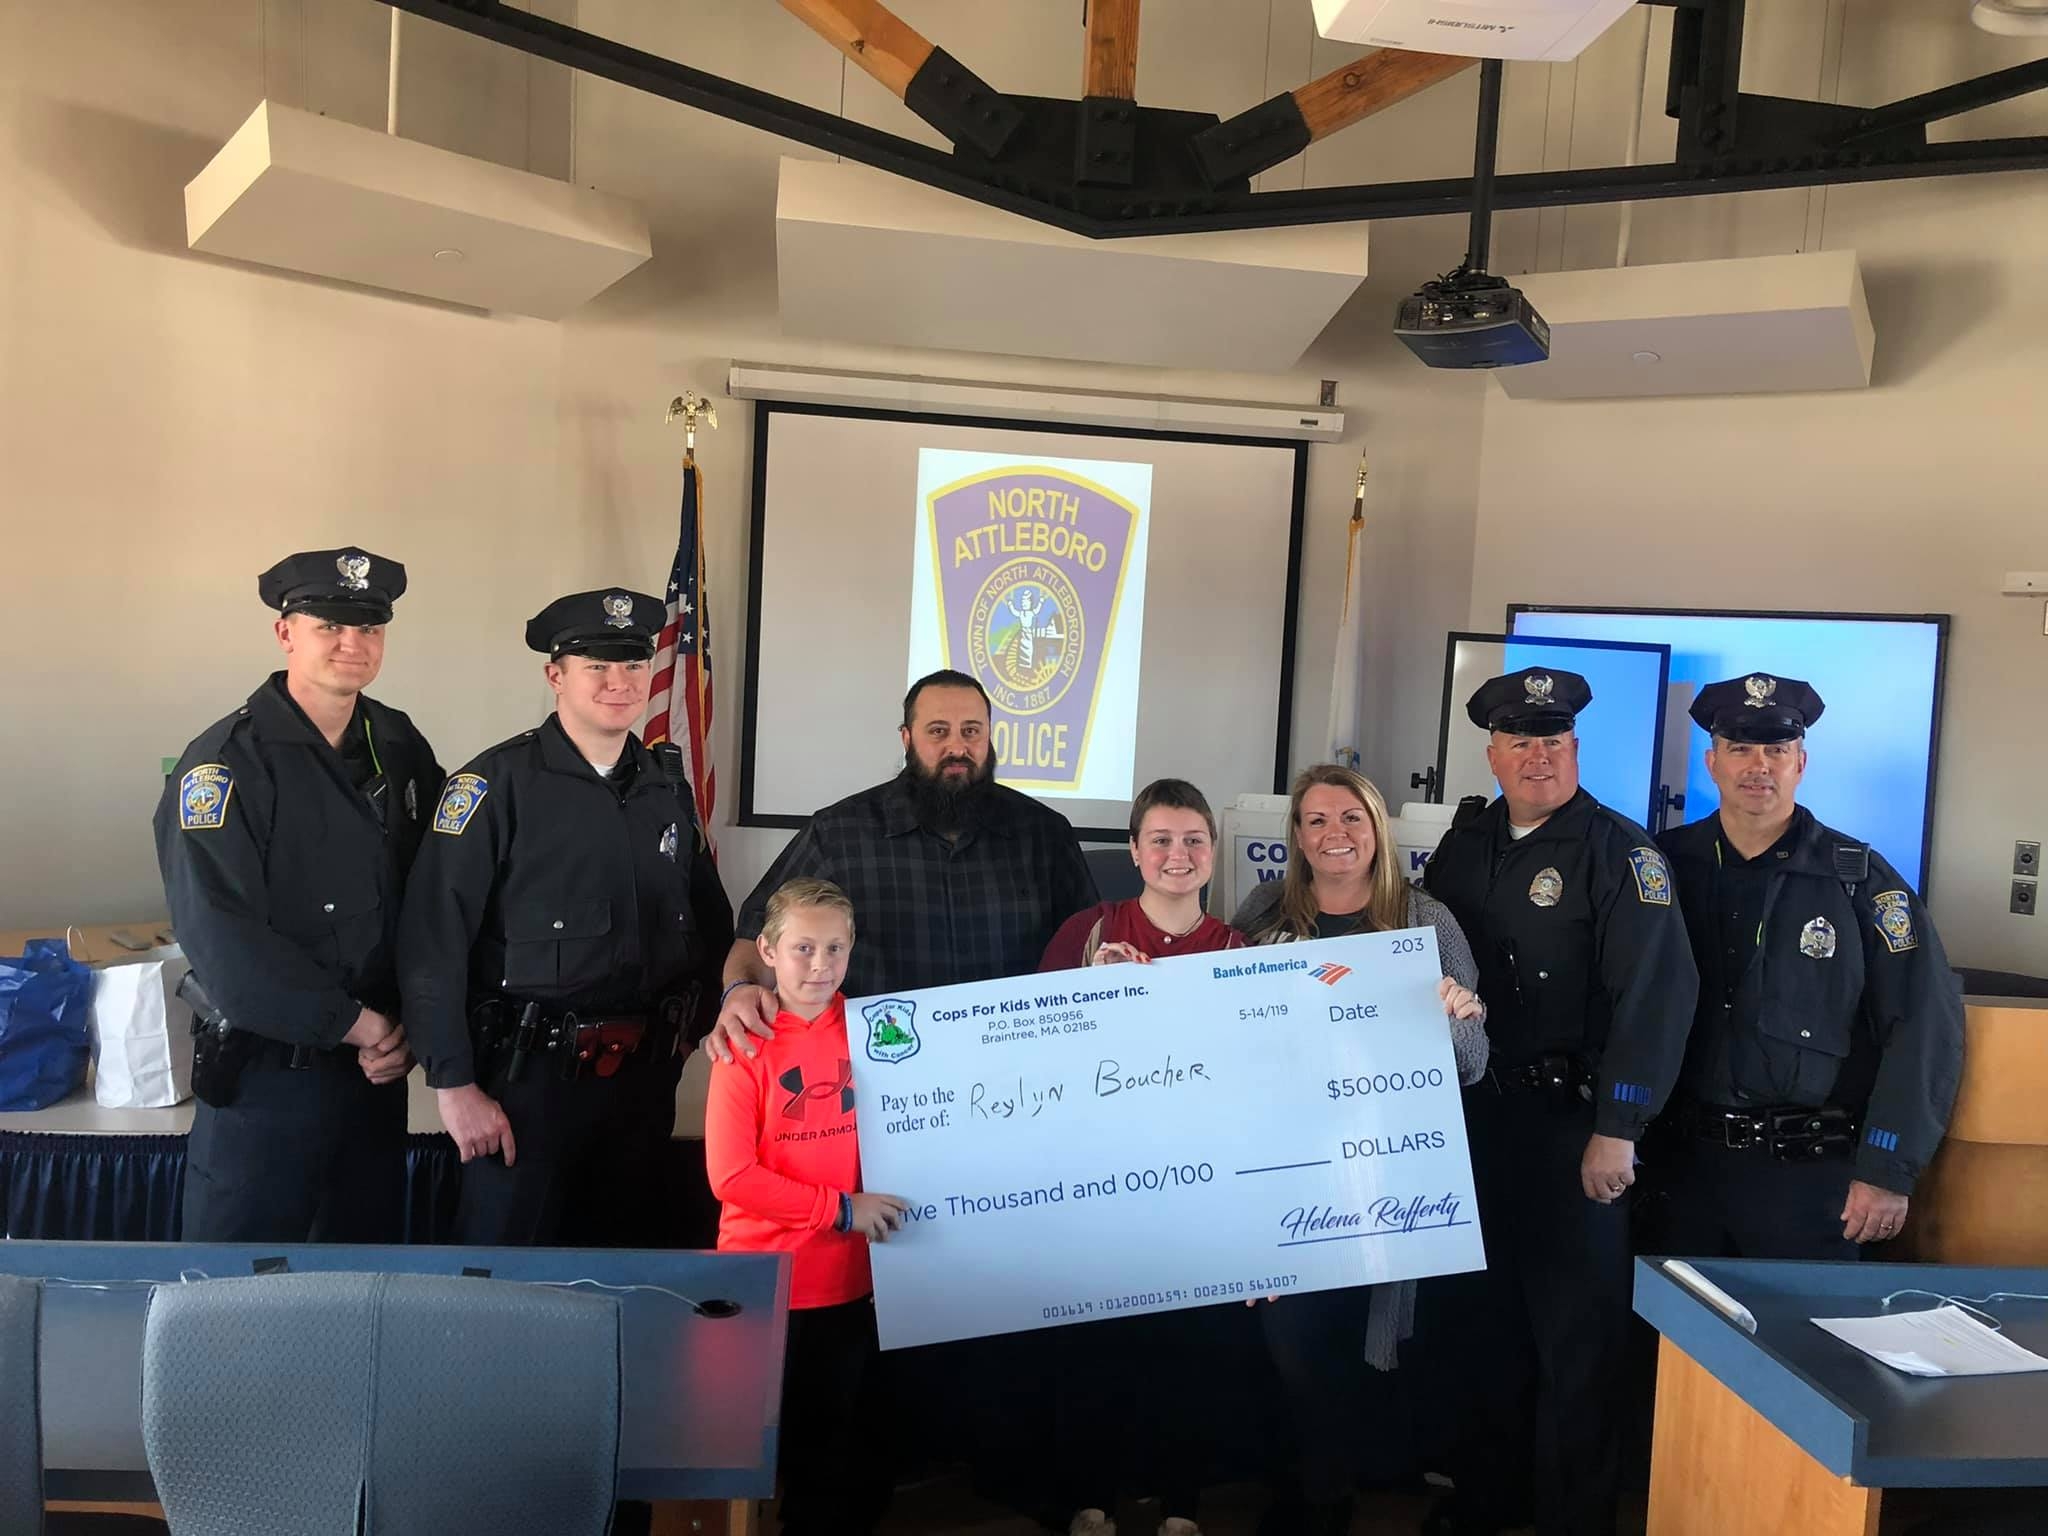 CFKWC’s went to N. Attleboro PD, where Kevin Calnan presented a $5,000 donation